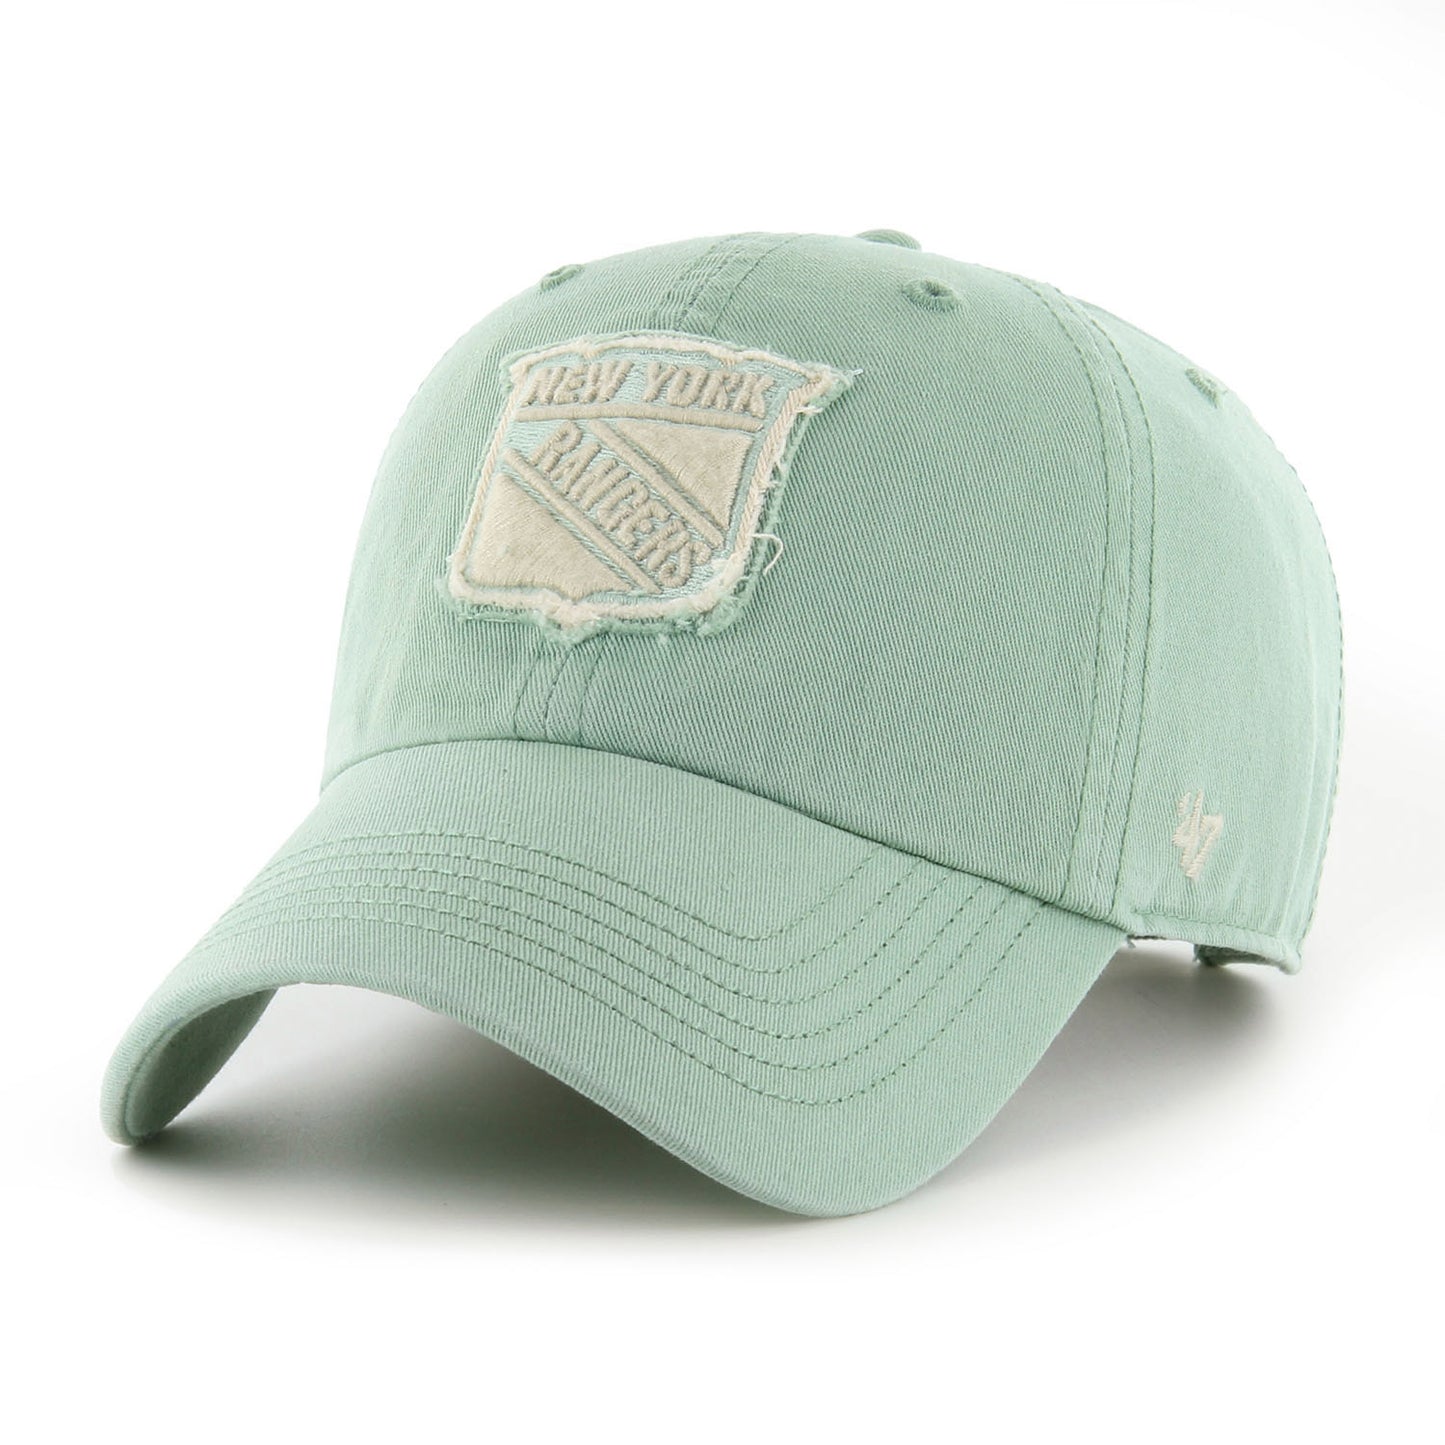 '47 Brand Rangers Mint Chasm Clean Up Hat In Green - Front View